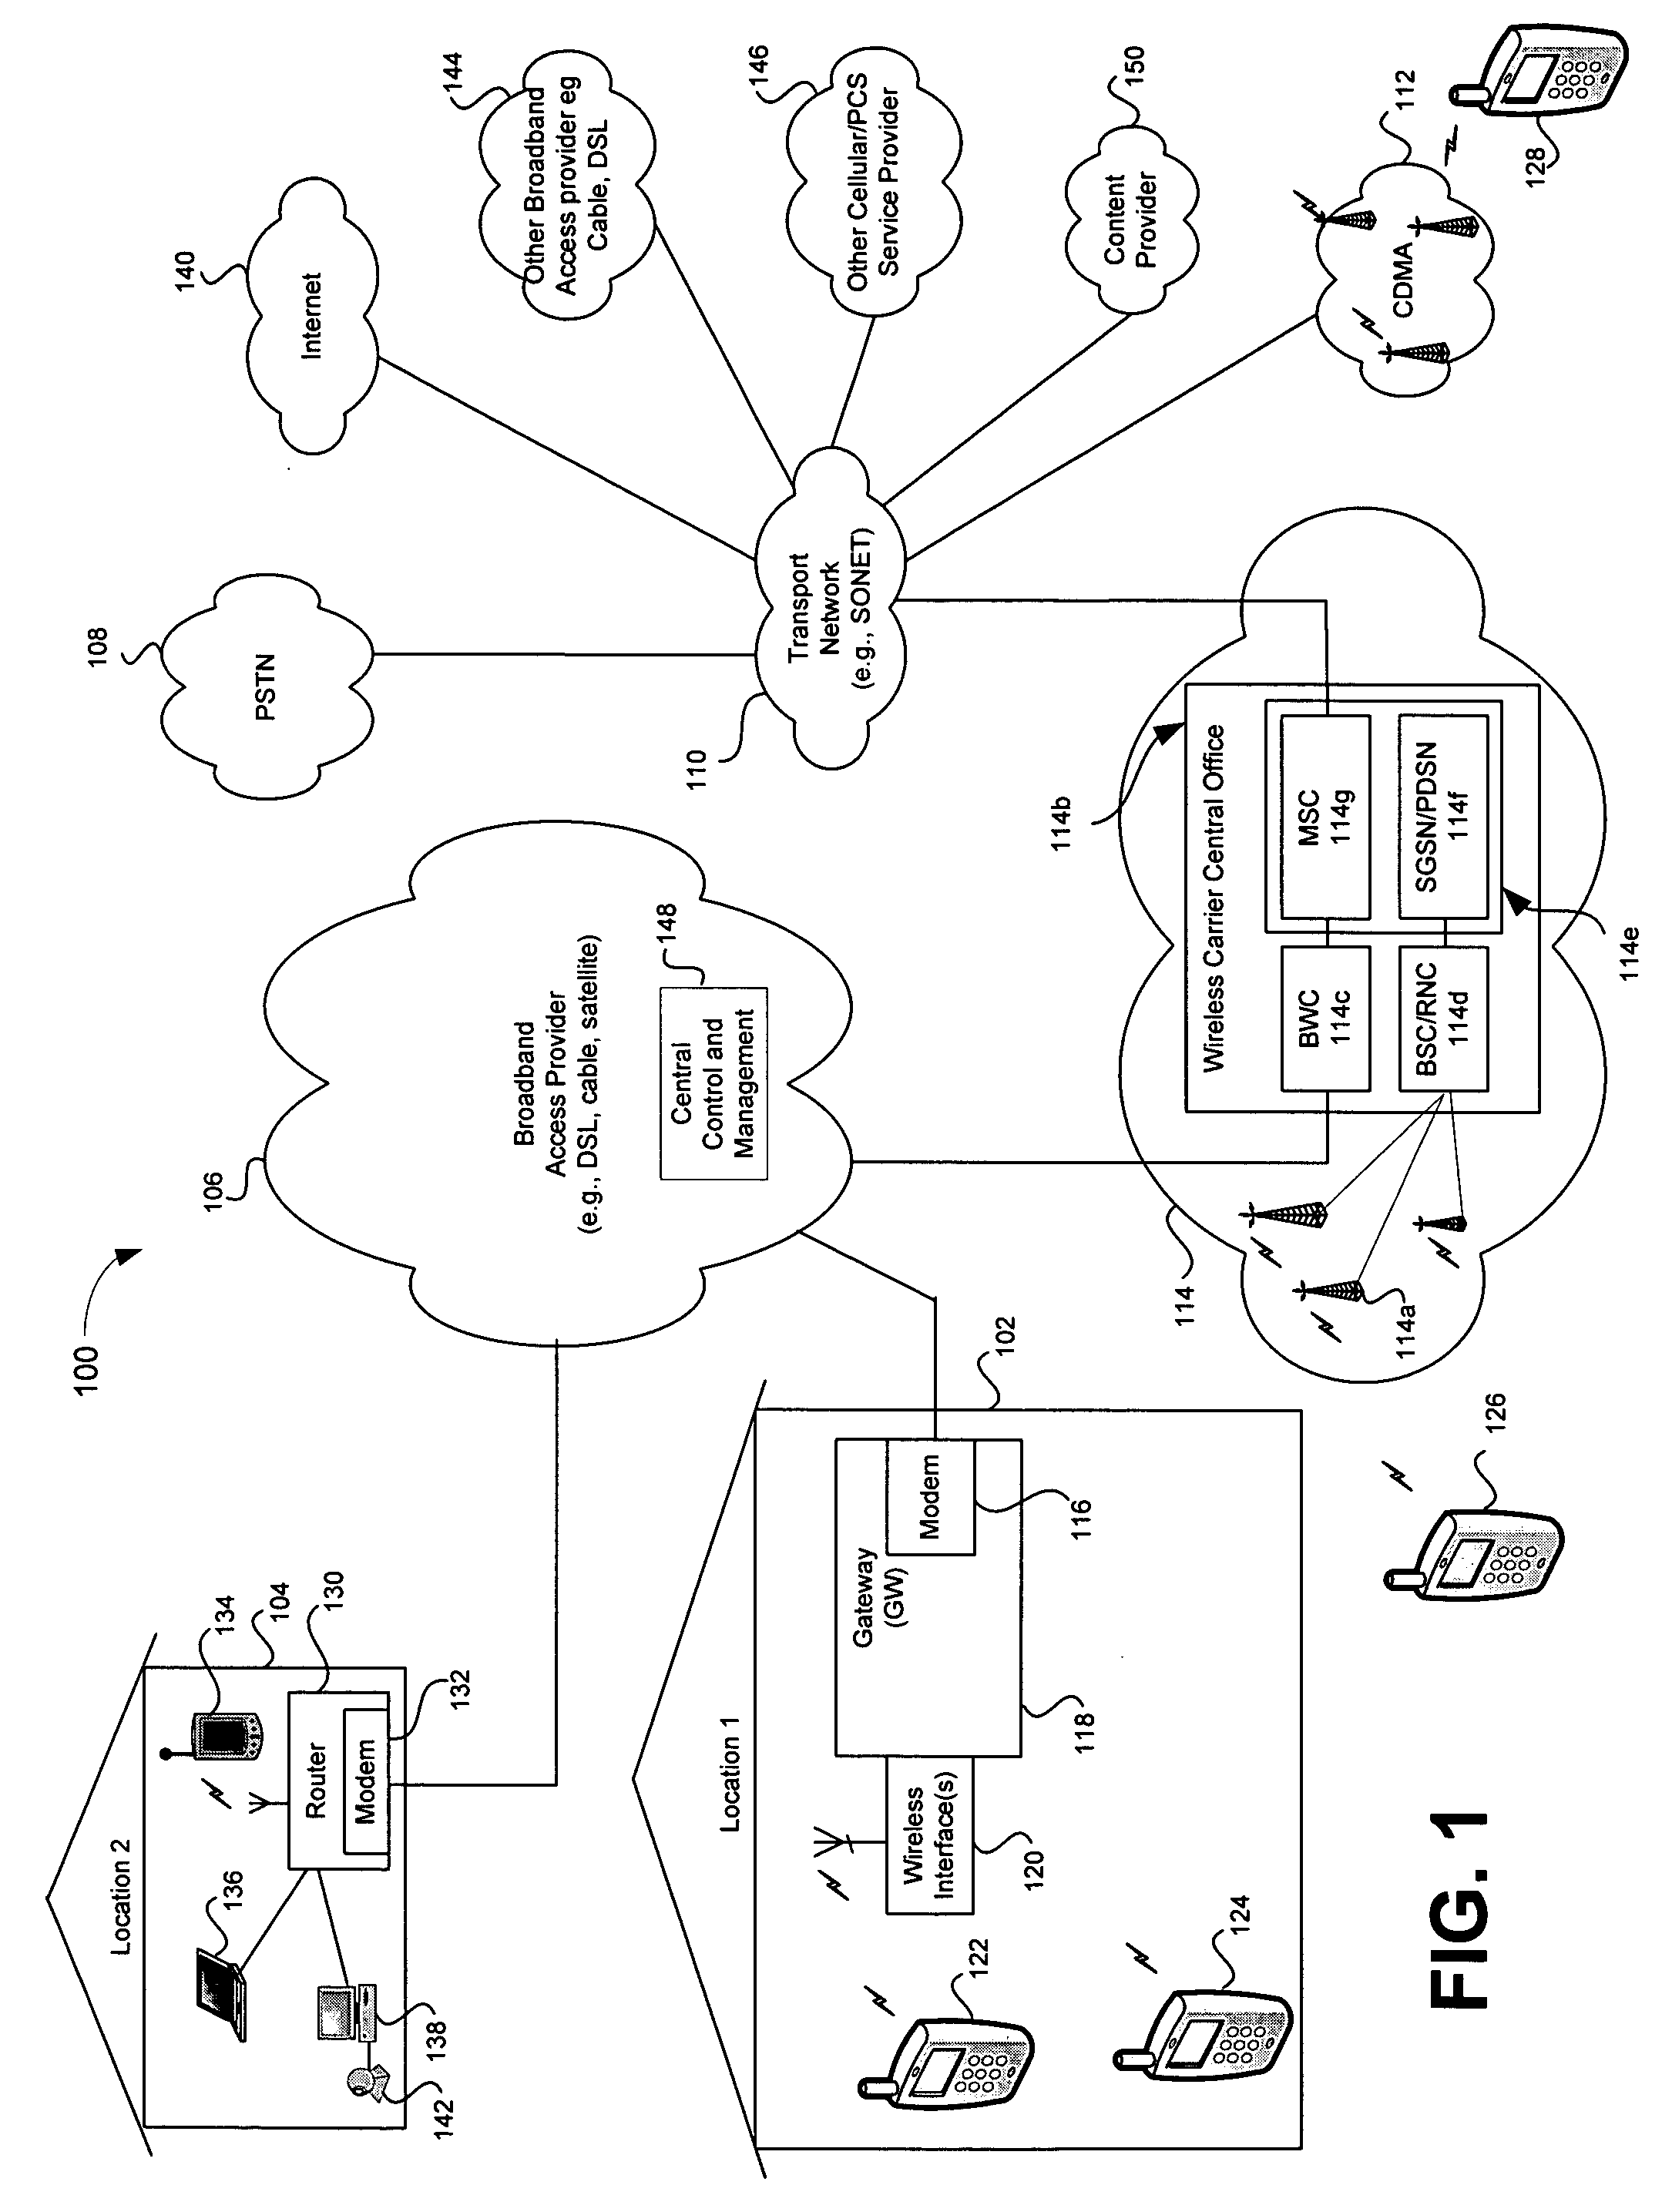 Method and system for extended network access services advertising via a broadband access gateway